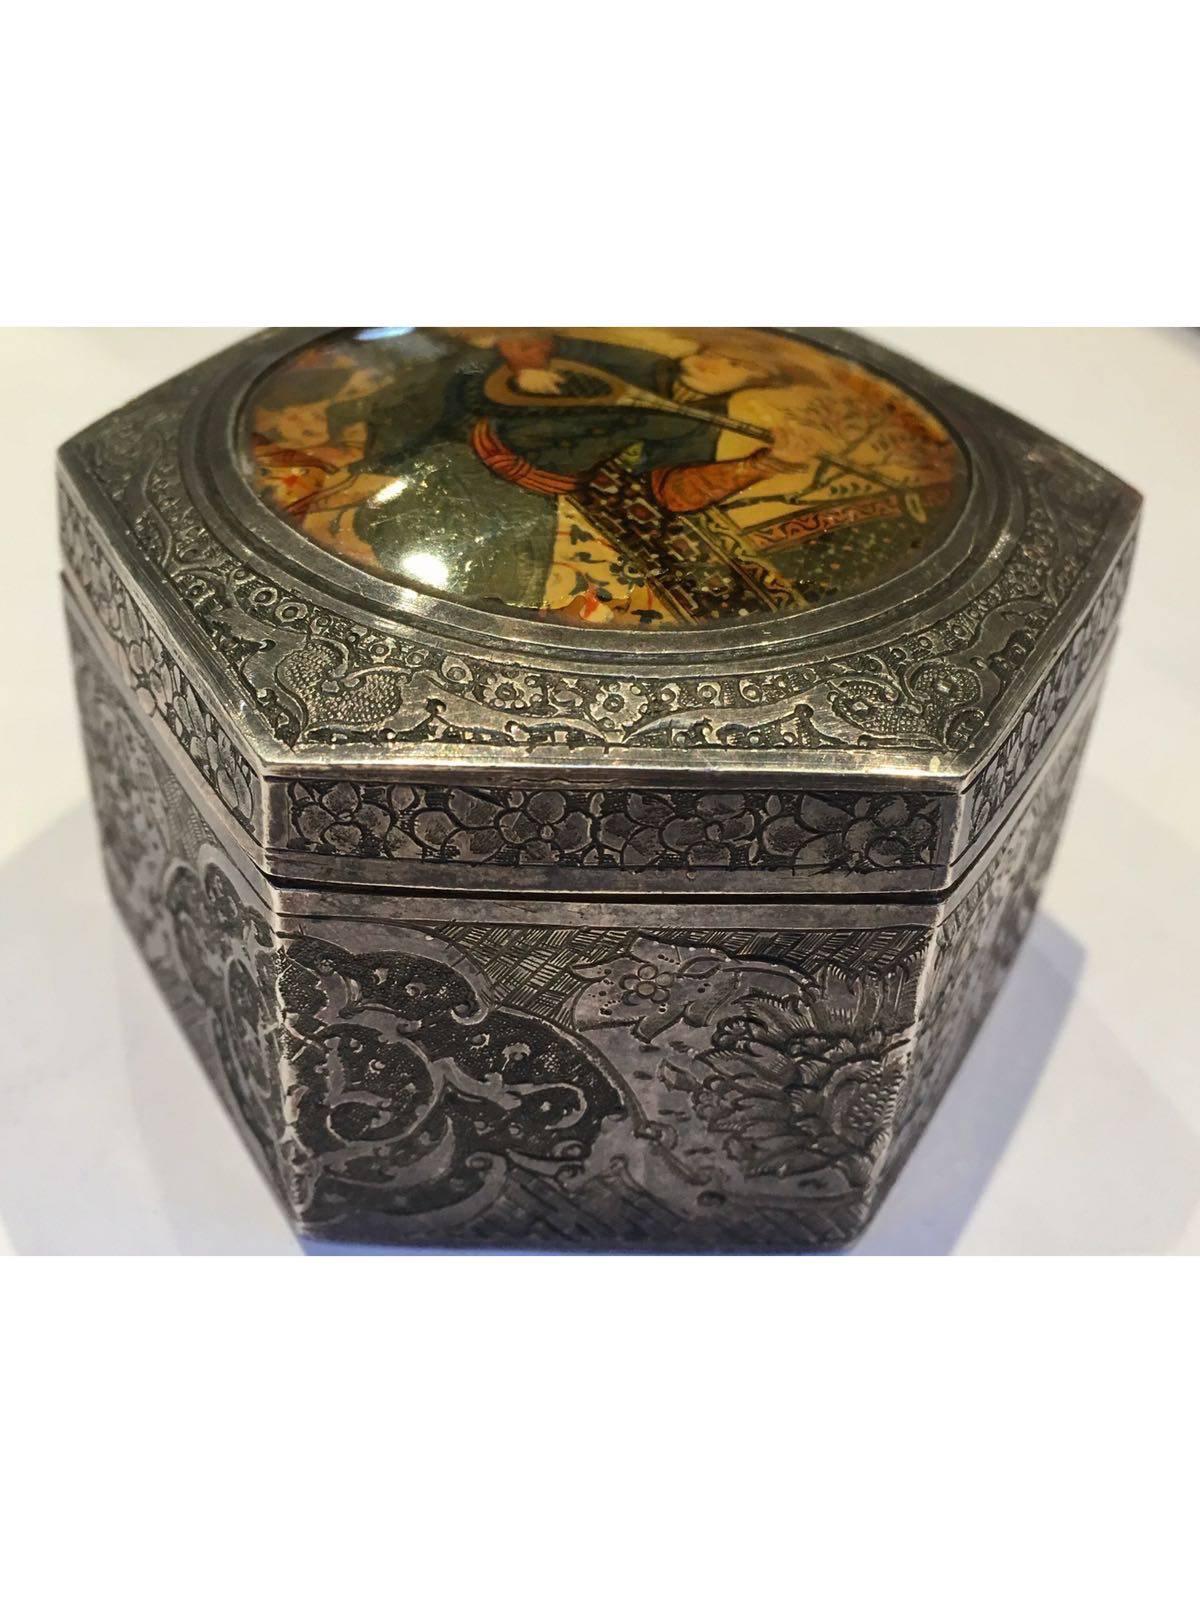 Other 20th Century, Engraved Silver Box with a Qajari Musician on the Top For Sale